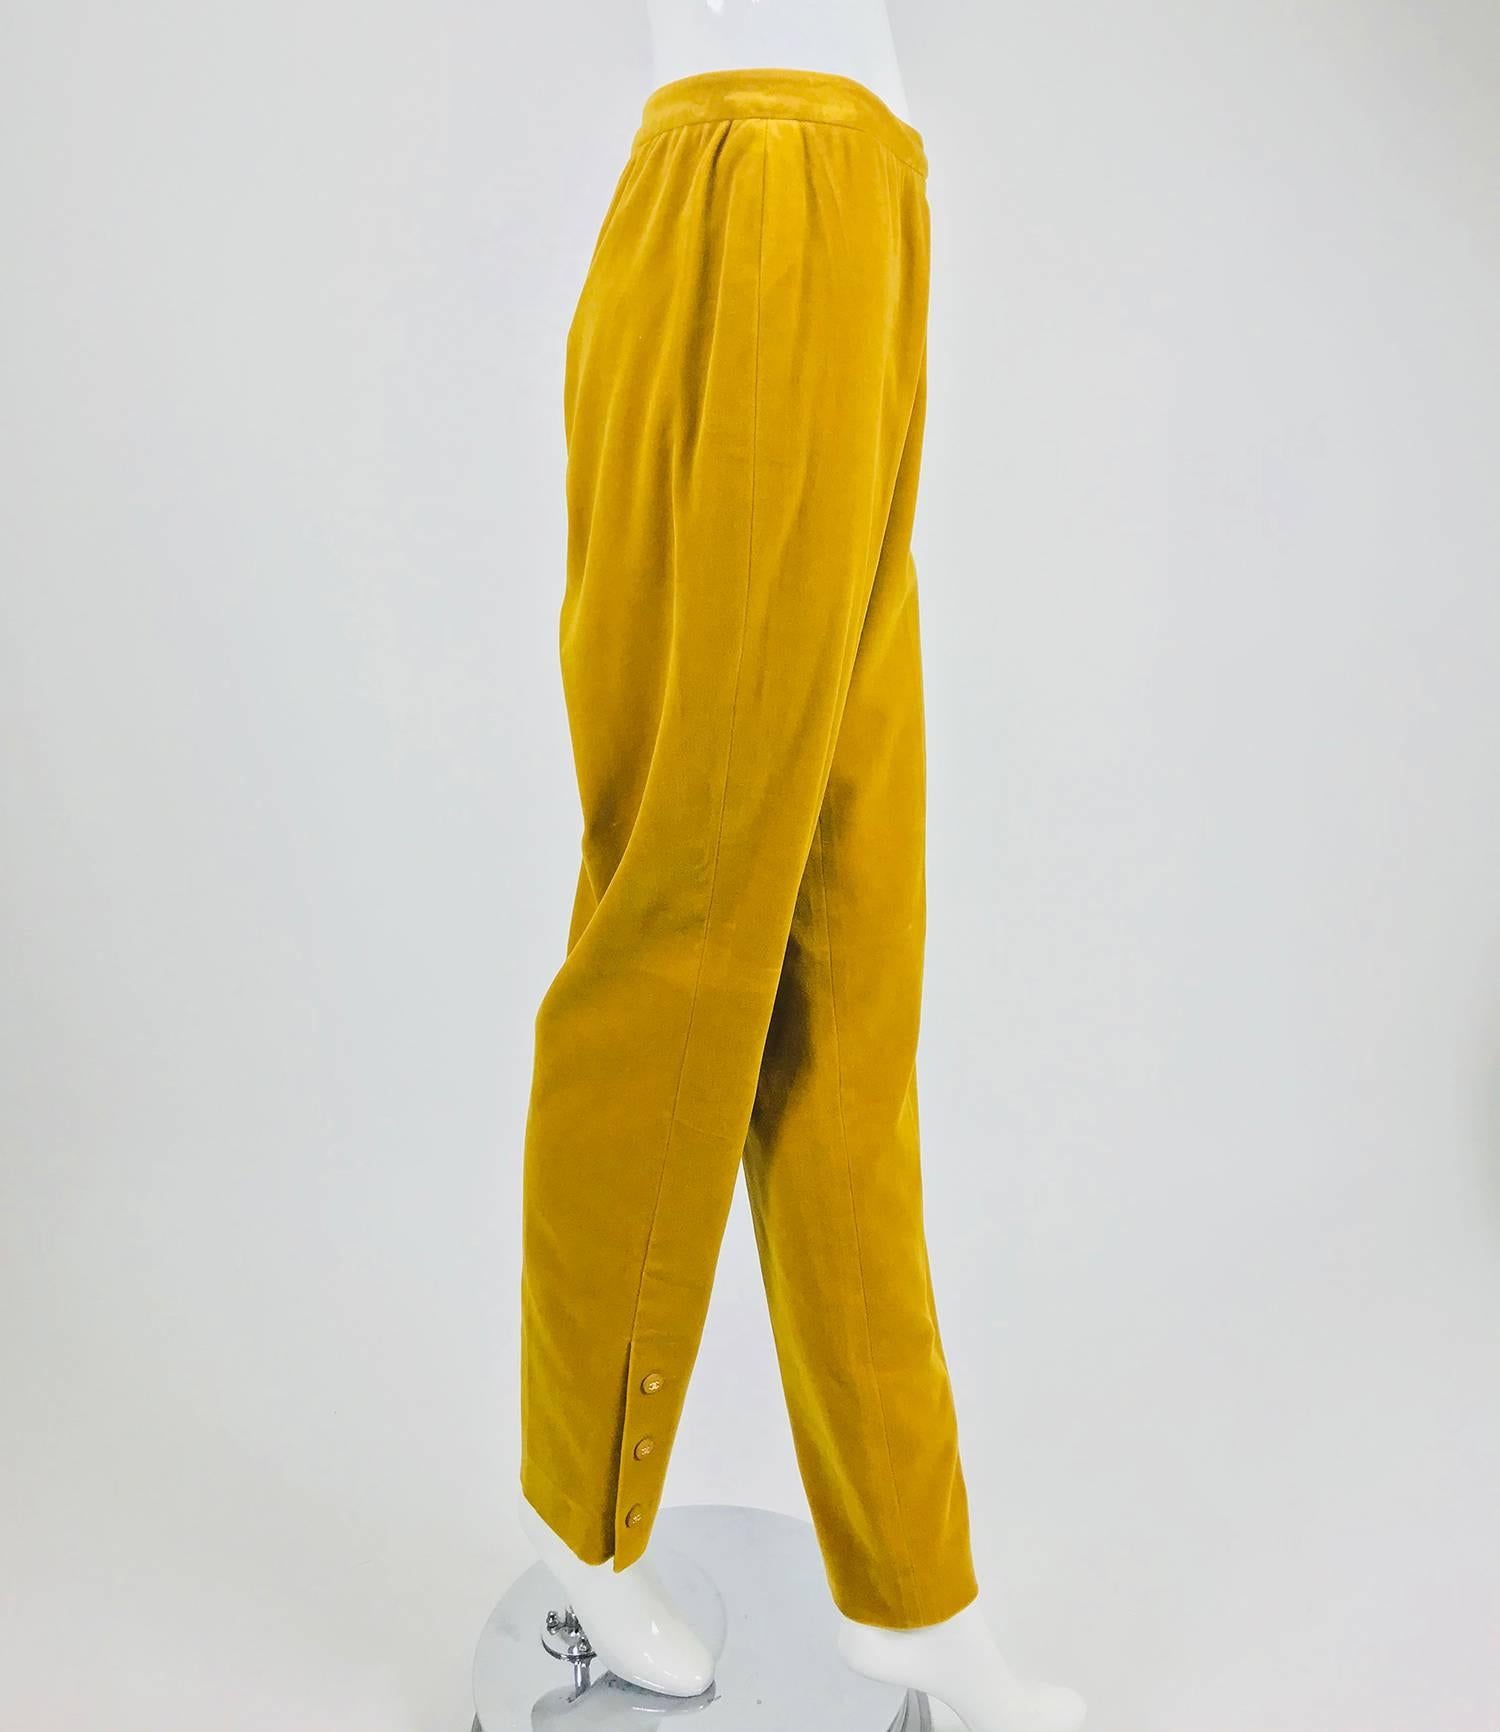 Chanel golden yellow velvet trousers with ankle buttons from the 1990s...Soft golden yellow velvet trousers sit at the natural waist with a waist band that closes at the side with button at the waist and a zipper below...Fuller at the hip and thigh